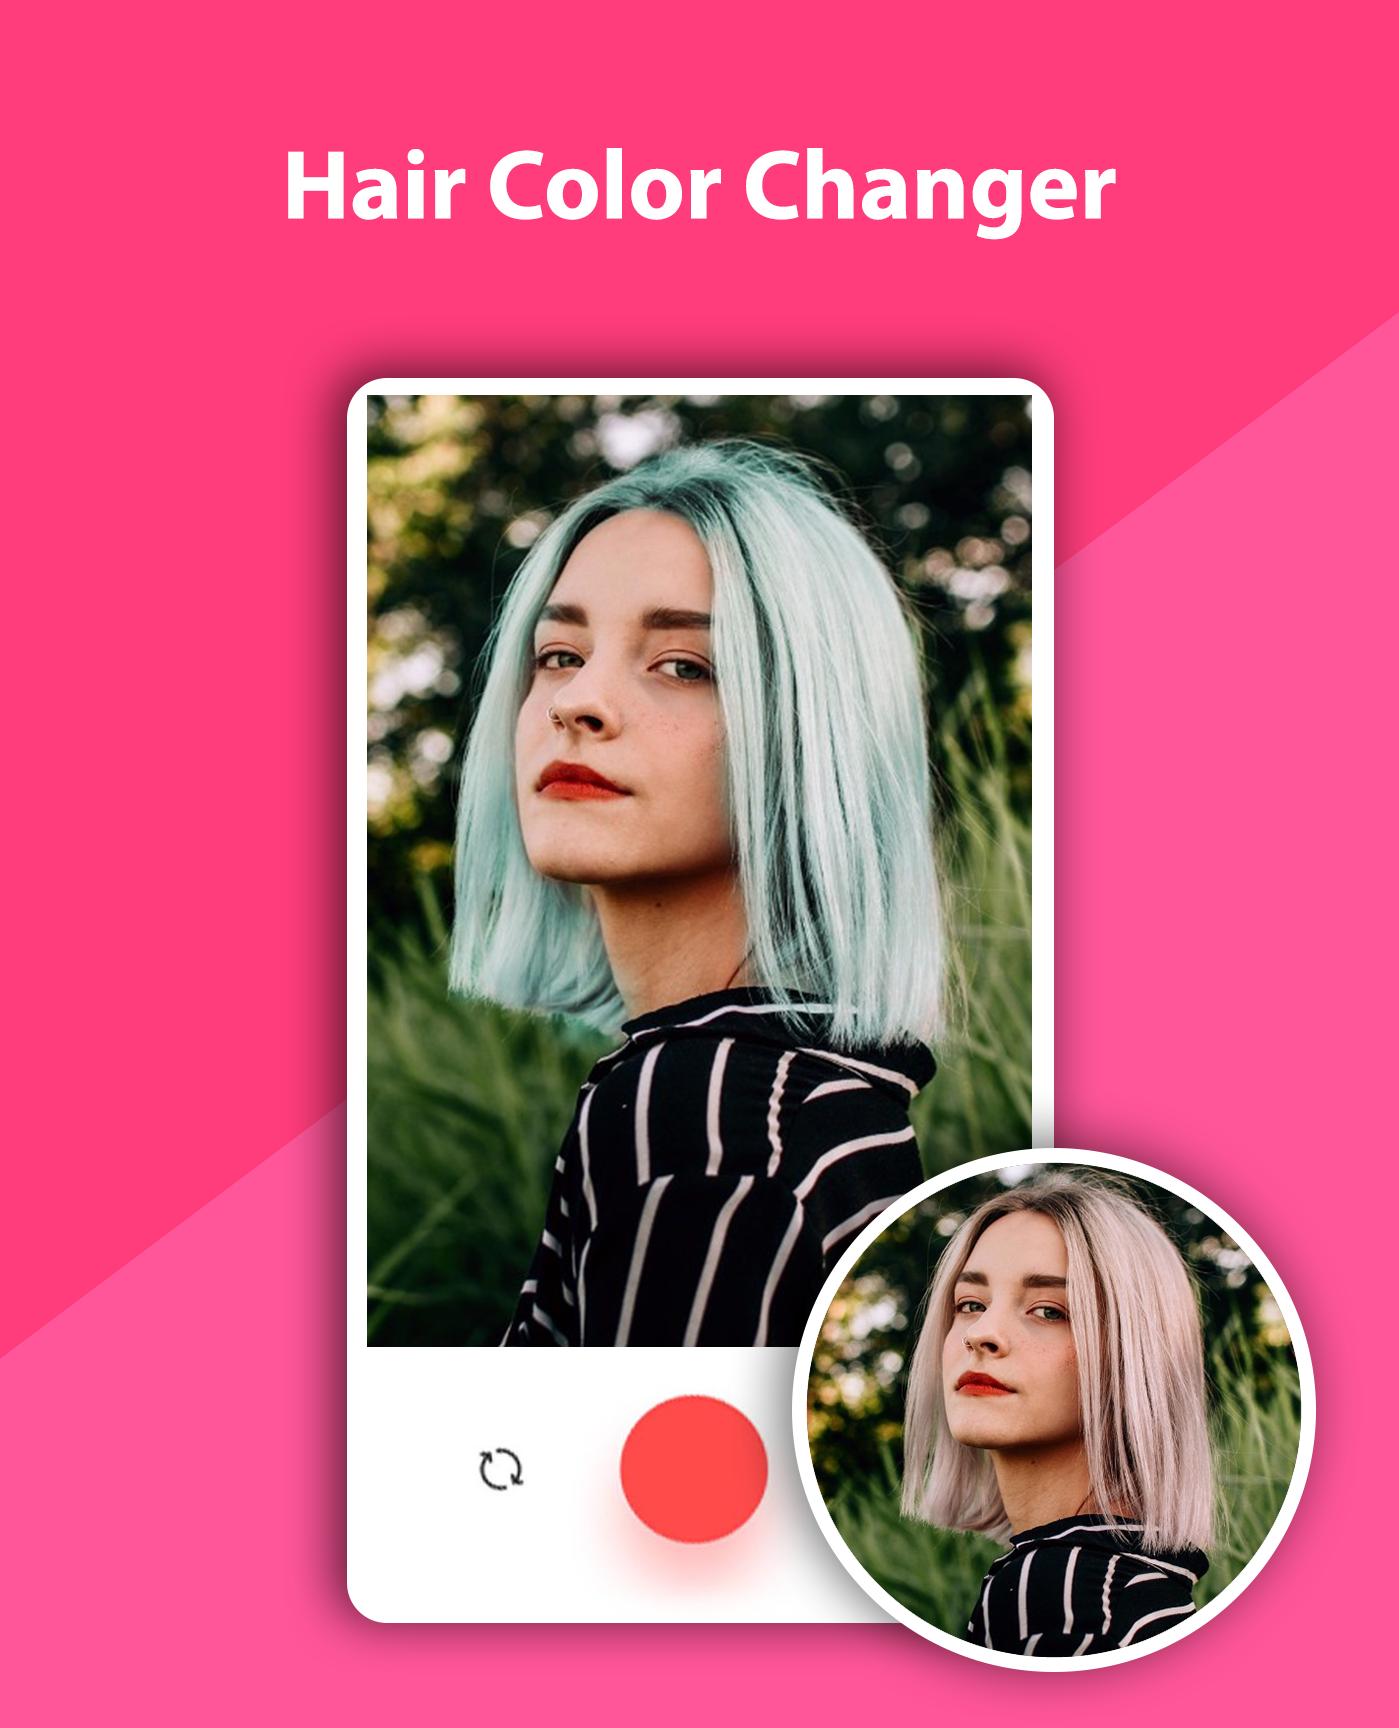 Hair color changer - Try different hair colors 1.0.0 Screenshot 1